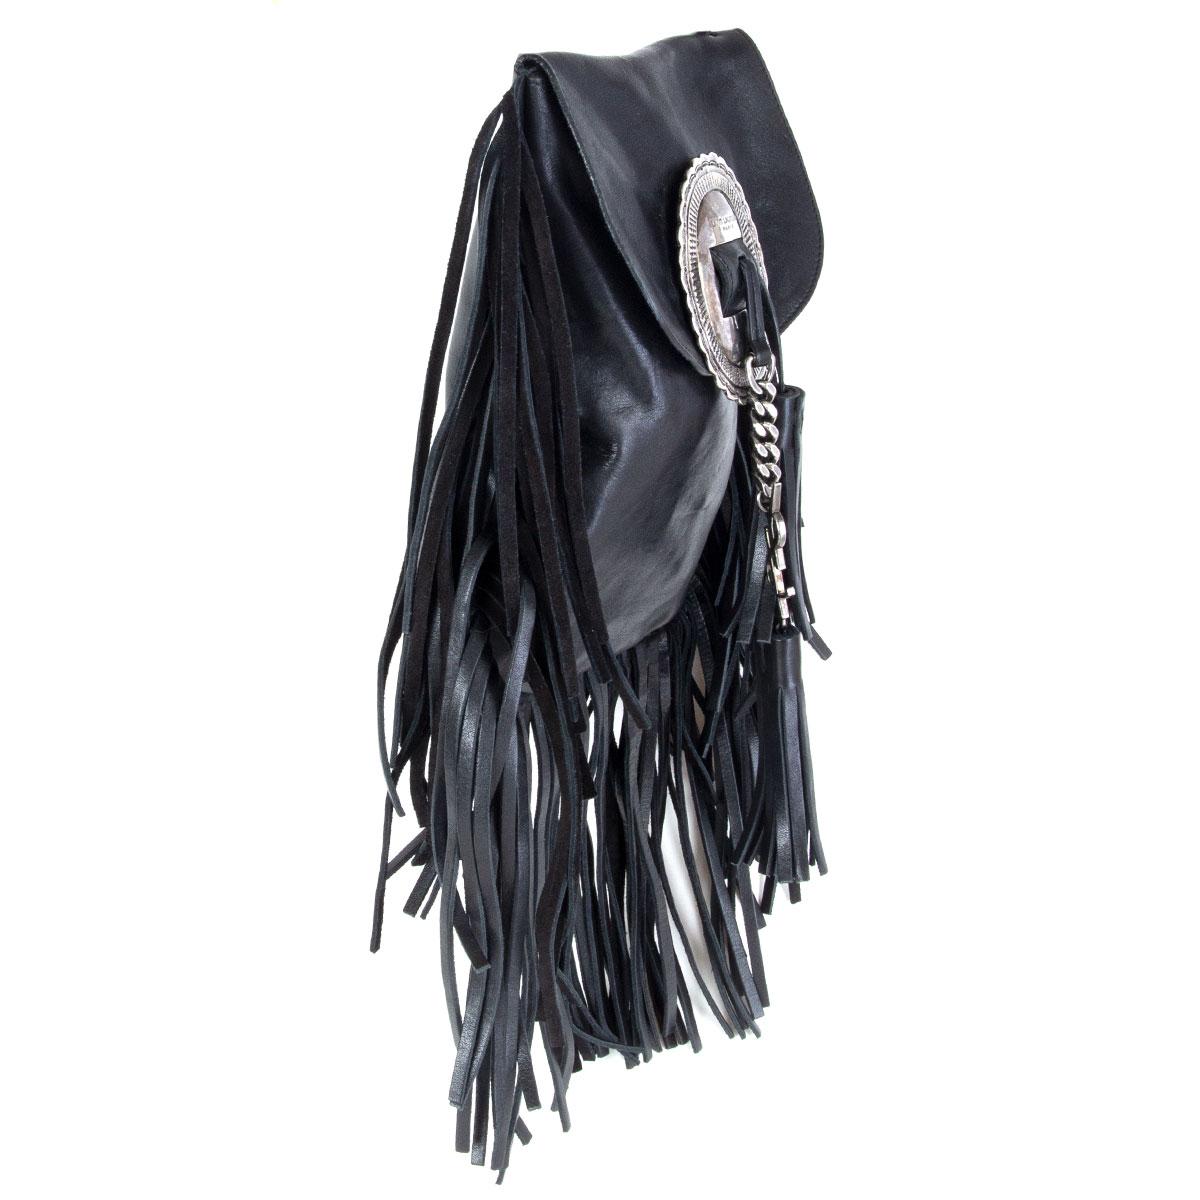 authentic Saint Laurent Anita fringed crossbody bag in black smooth leather featuring silver-tone hardware. Opens with a flap and tassels with chain and YSL logo. Lined in black suede. Has been carried and is in excellent condition. 

Height 23cm